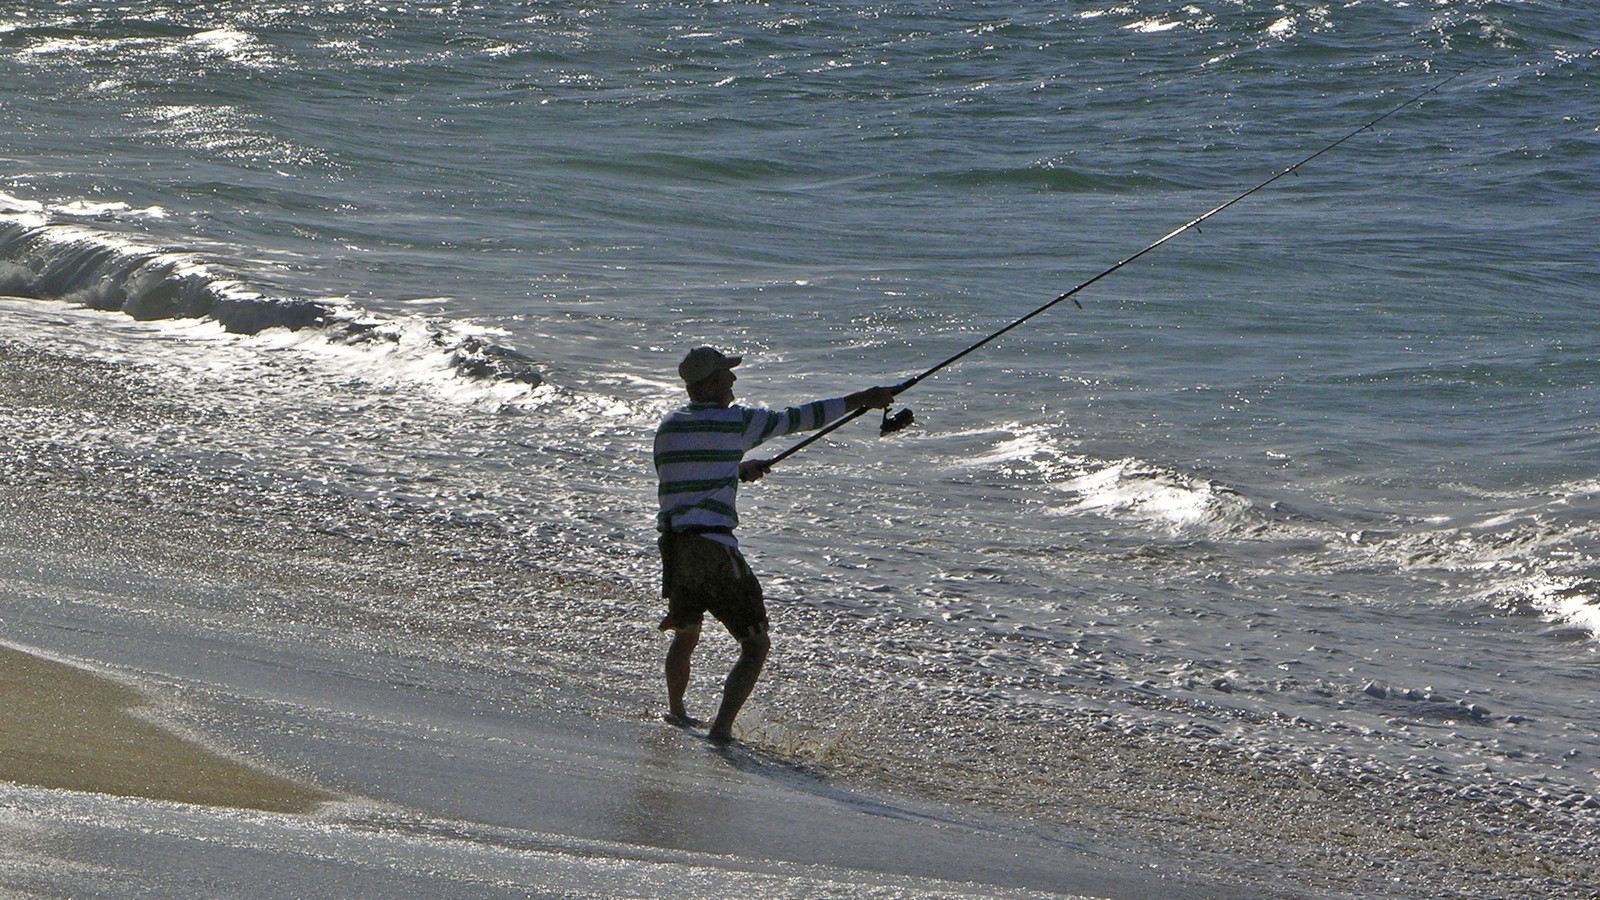 https://static.citylifestyle.com/articles/surf-fishing-in-cabo/387330-1600.jpg?v=1